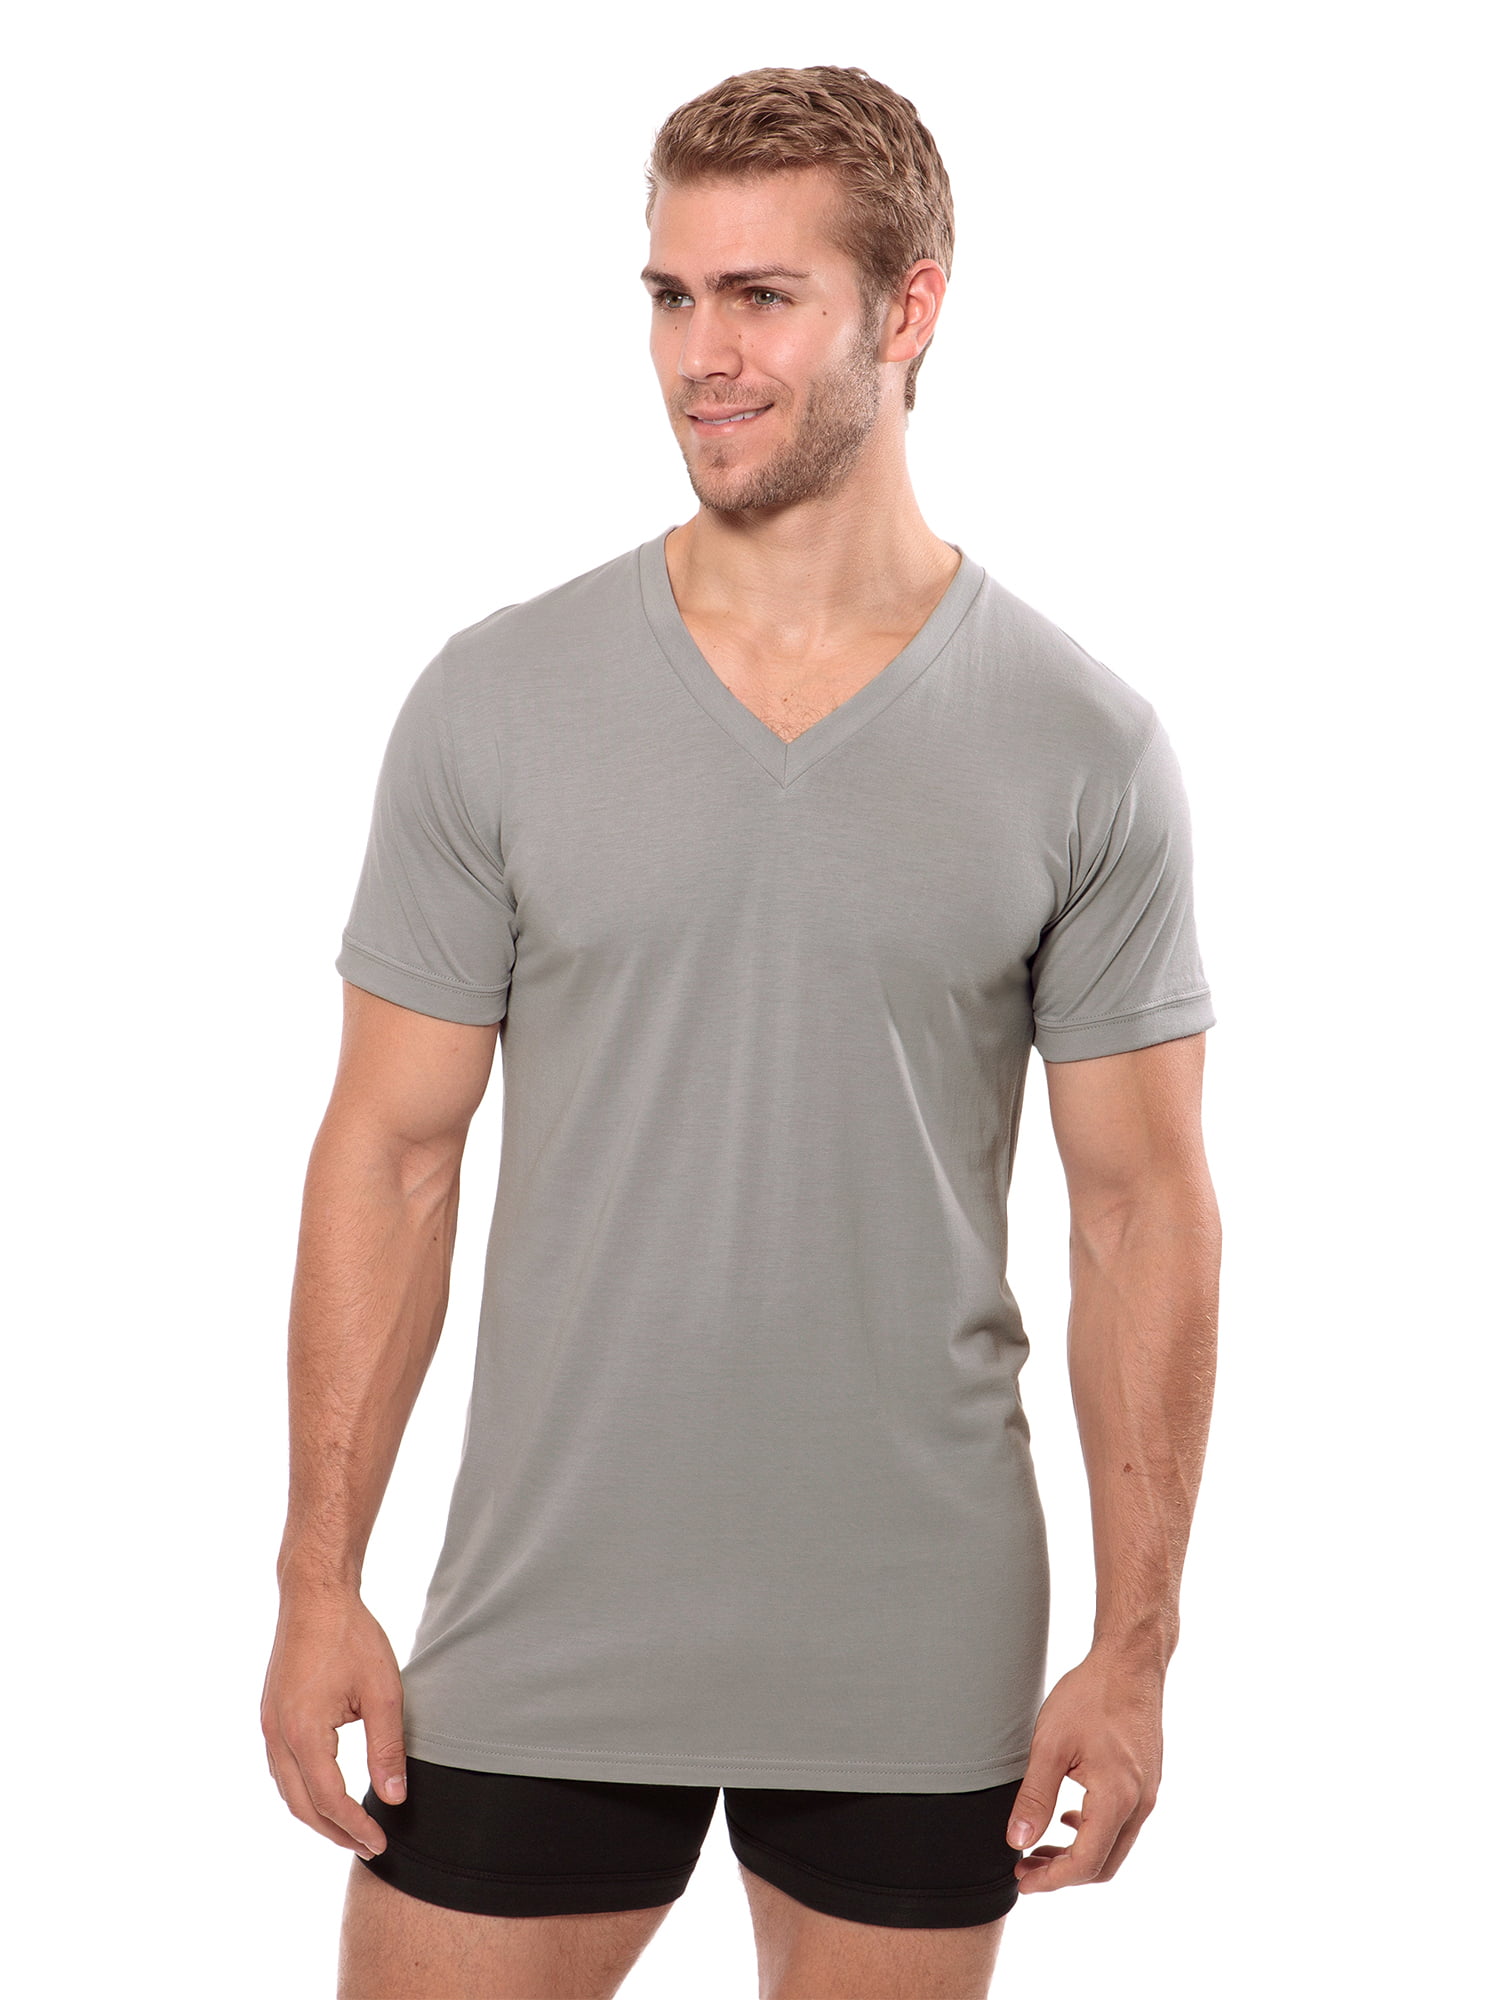 Texere Mens V-Neck 2 Pack Undershirt Meio, Light Gray, XXLT Fathers Day 